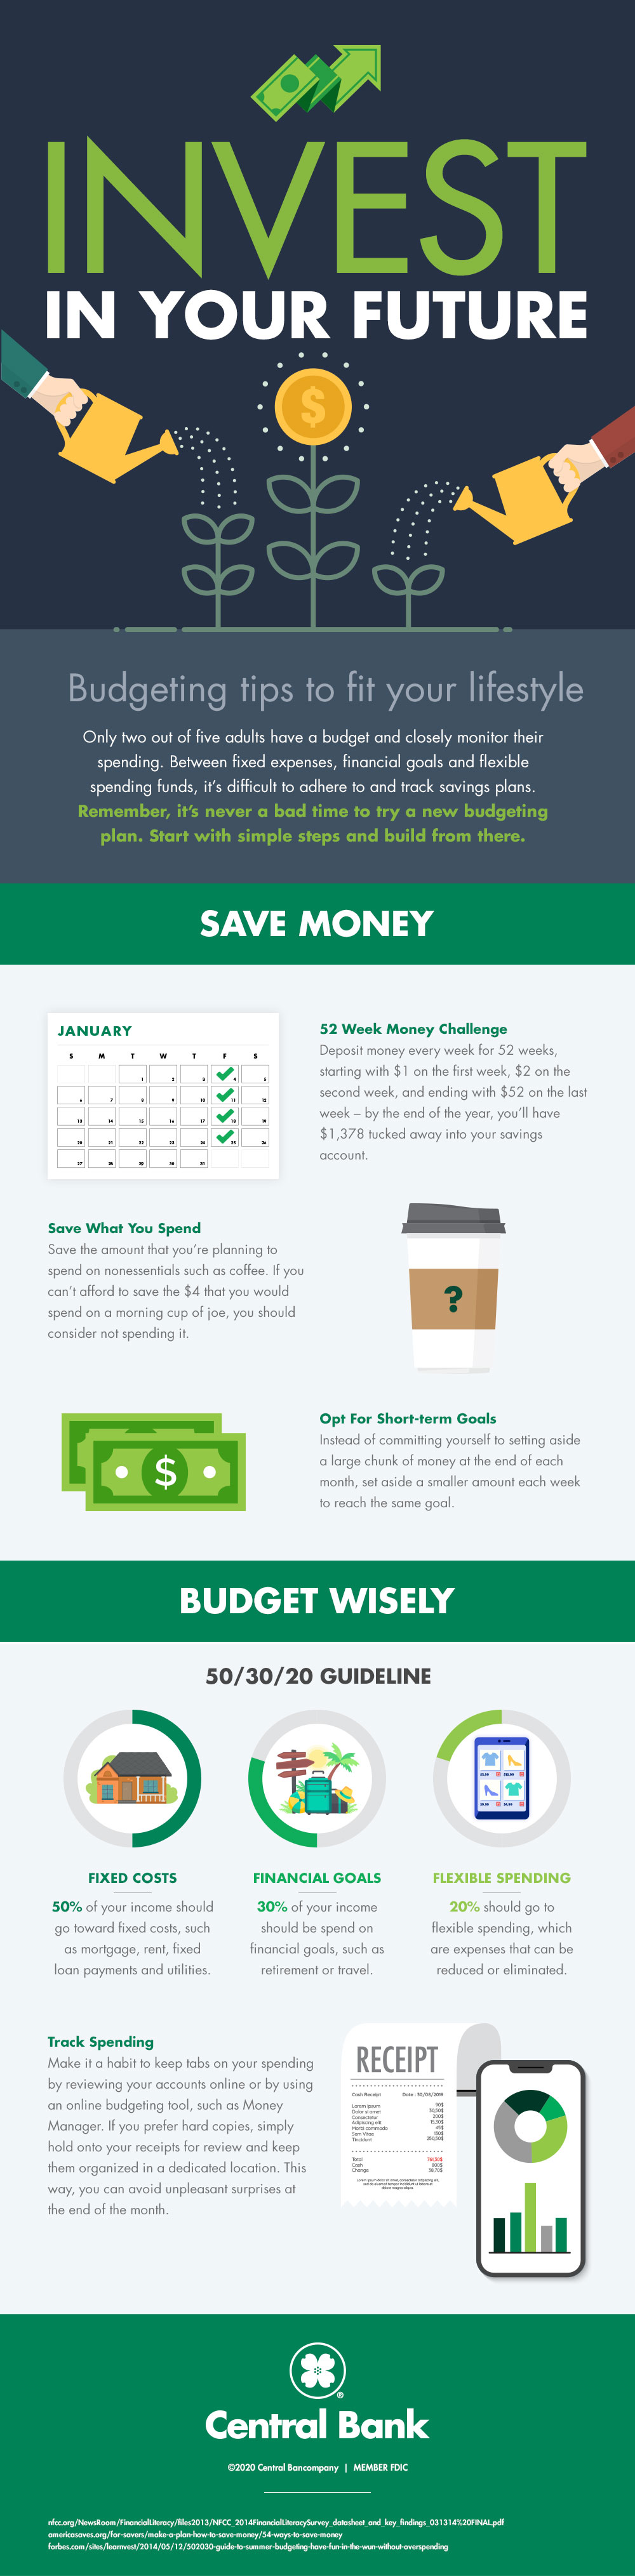 An infographic about how to invest in your future